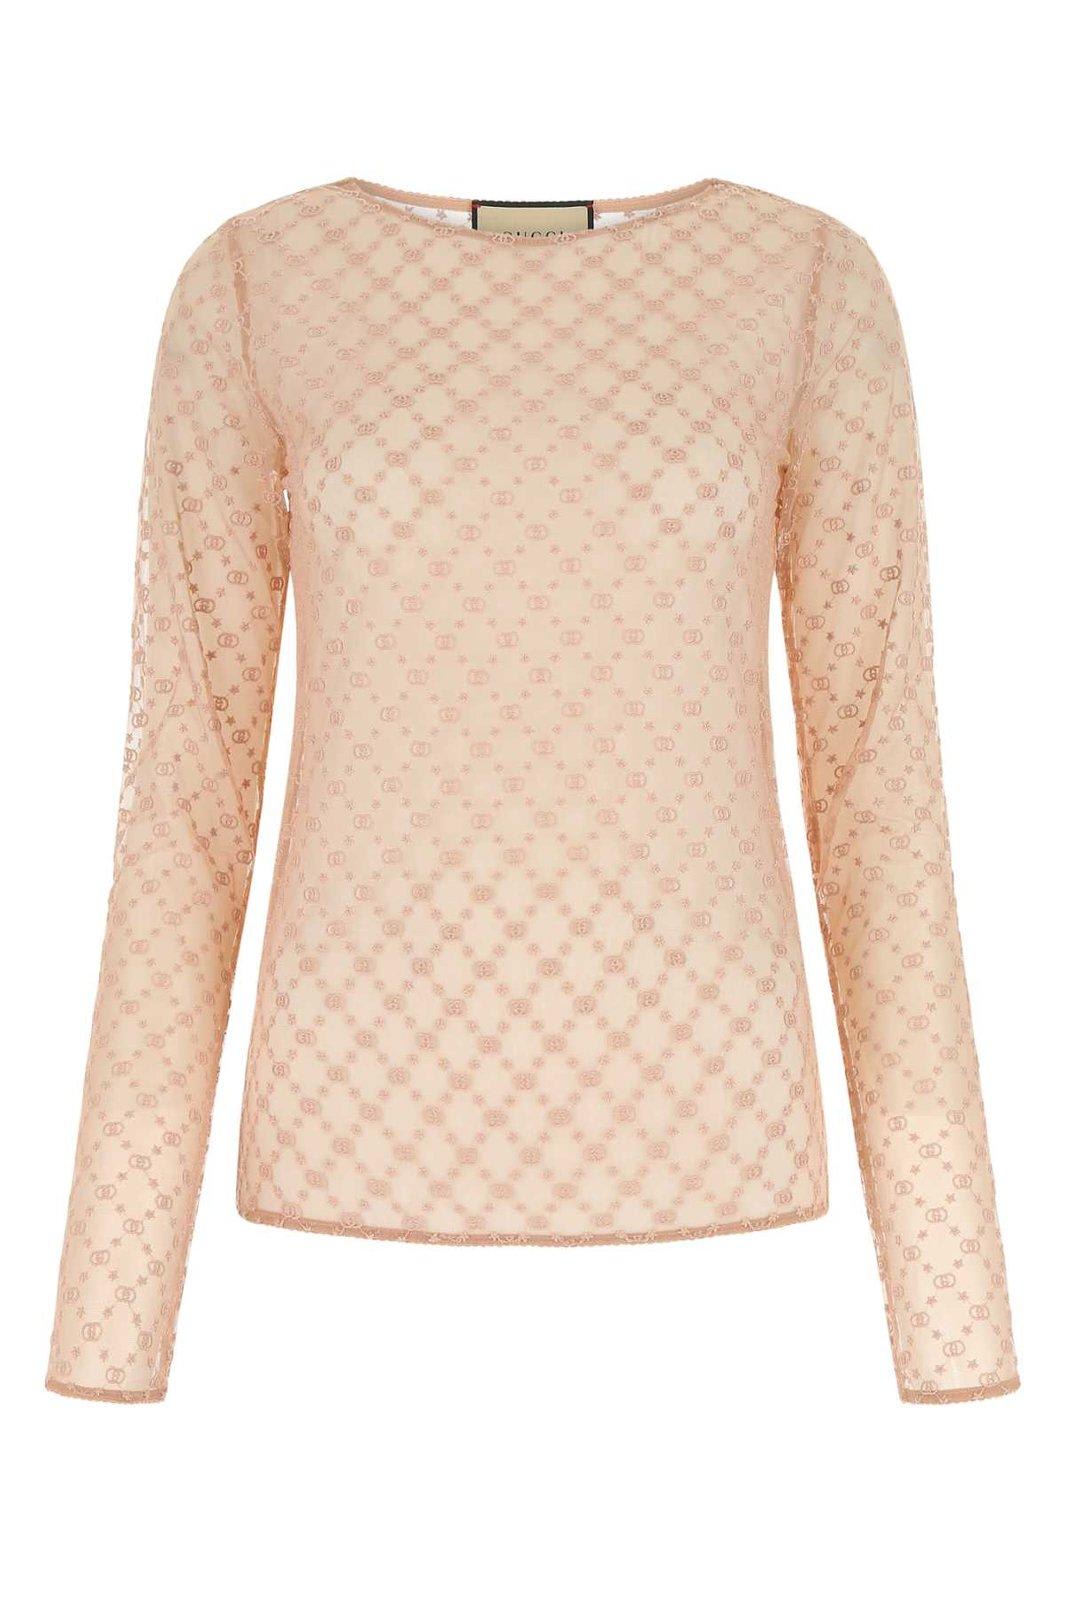 GUCCI EMBROIDERED MESH TOP